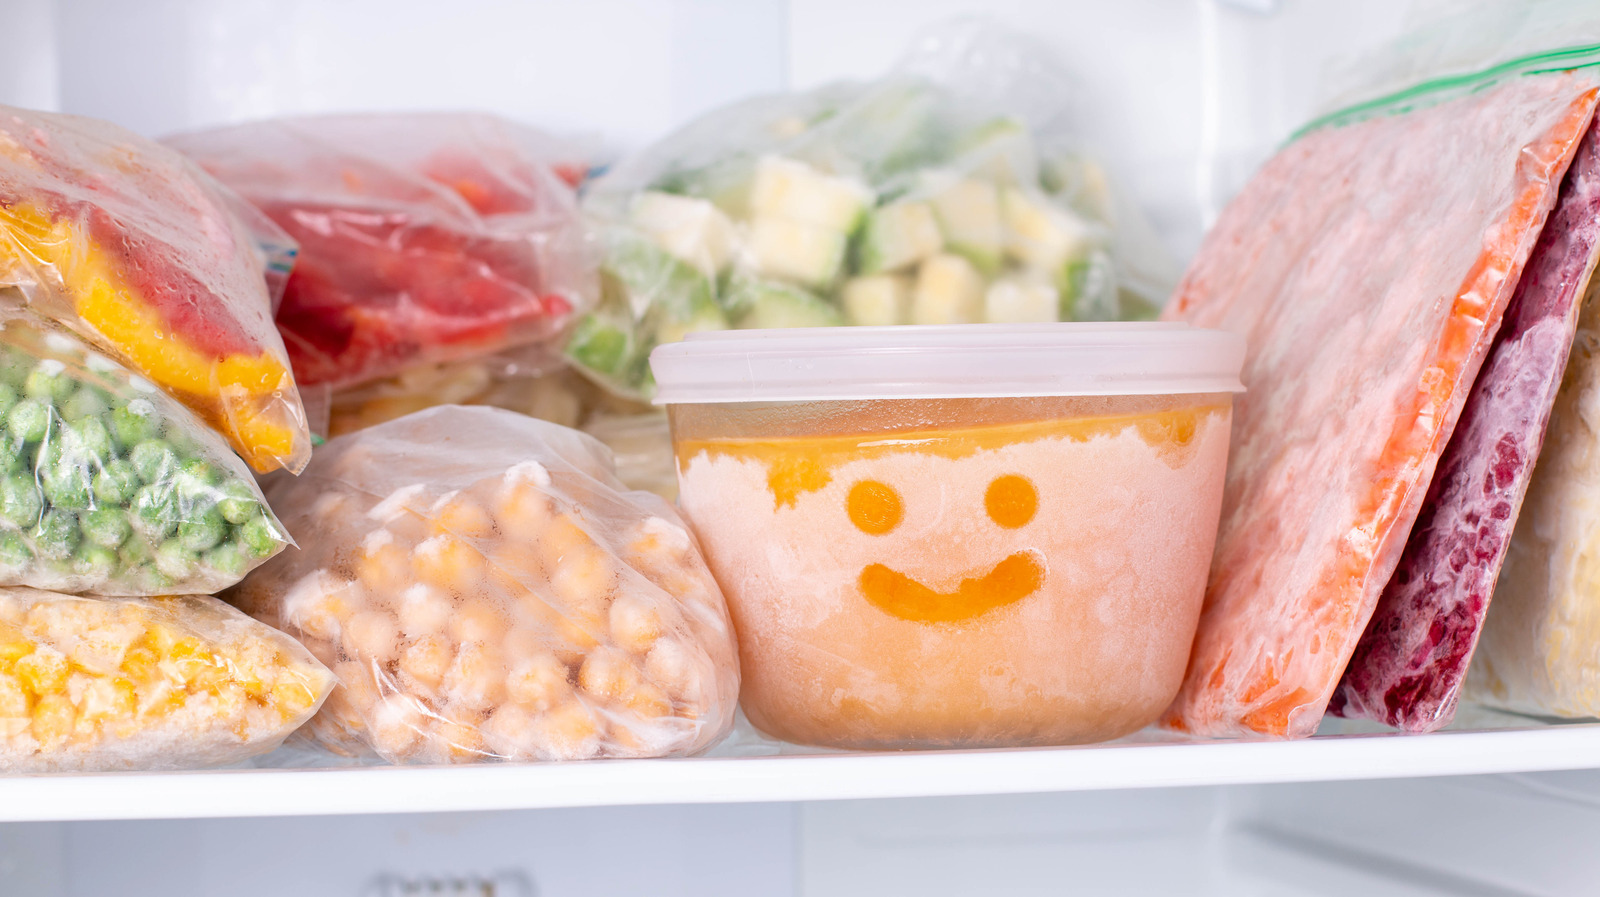 https://www.thedailymeal.com/img/gallery/does-freezing-food-kill-harmful-bacteria/l-intro-1670012893.jpg